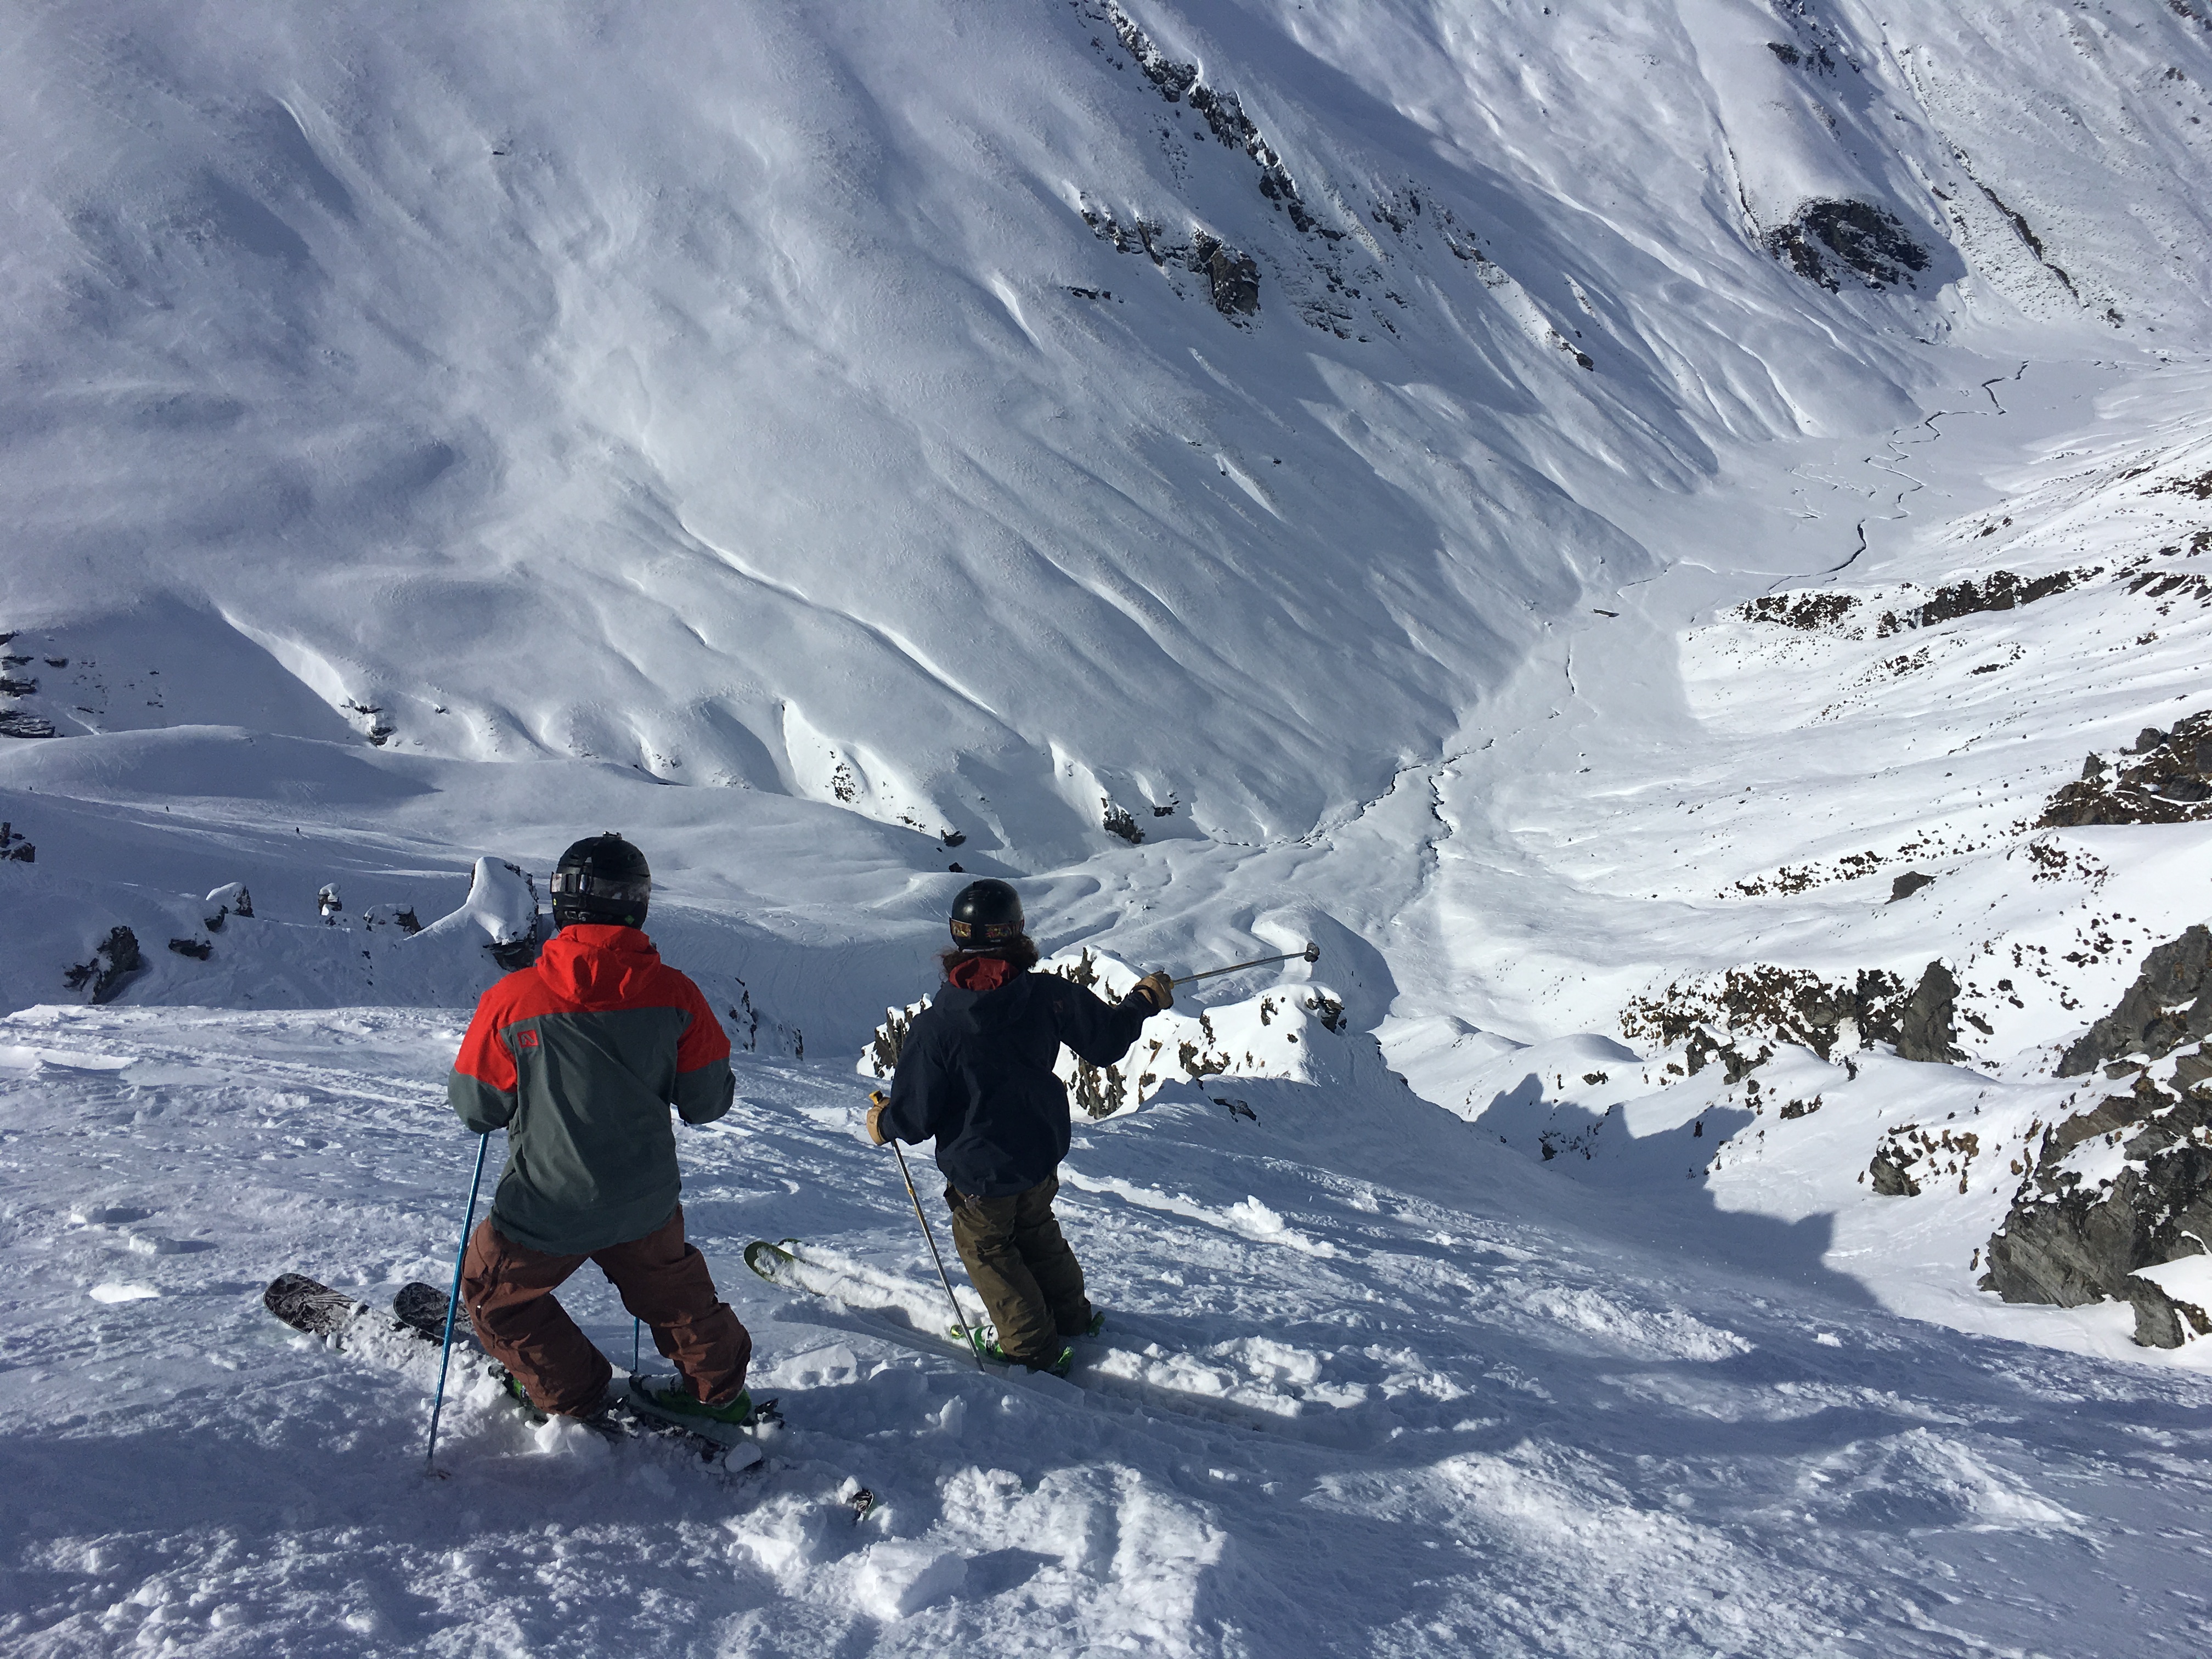 Scoping lines in the Motatapu Chutes